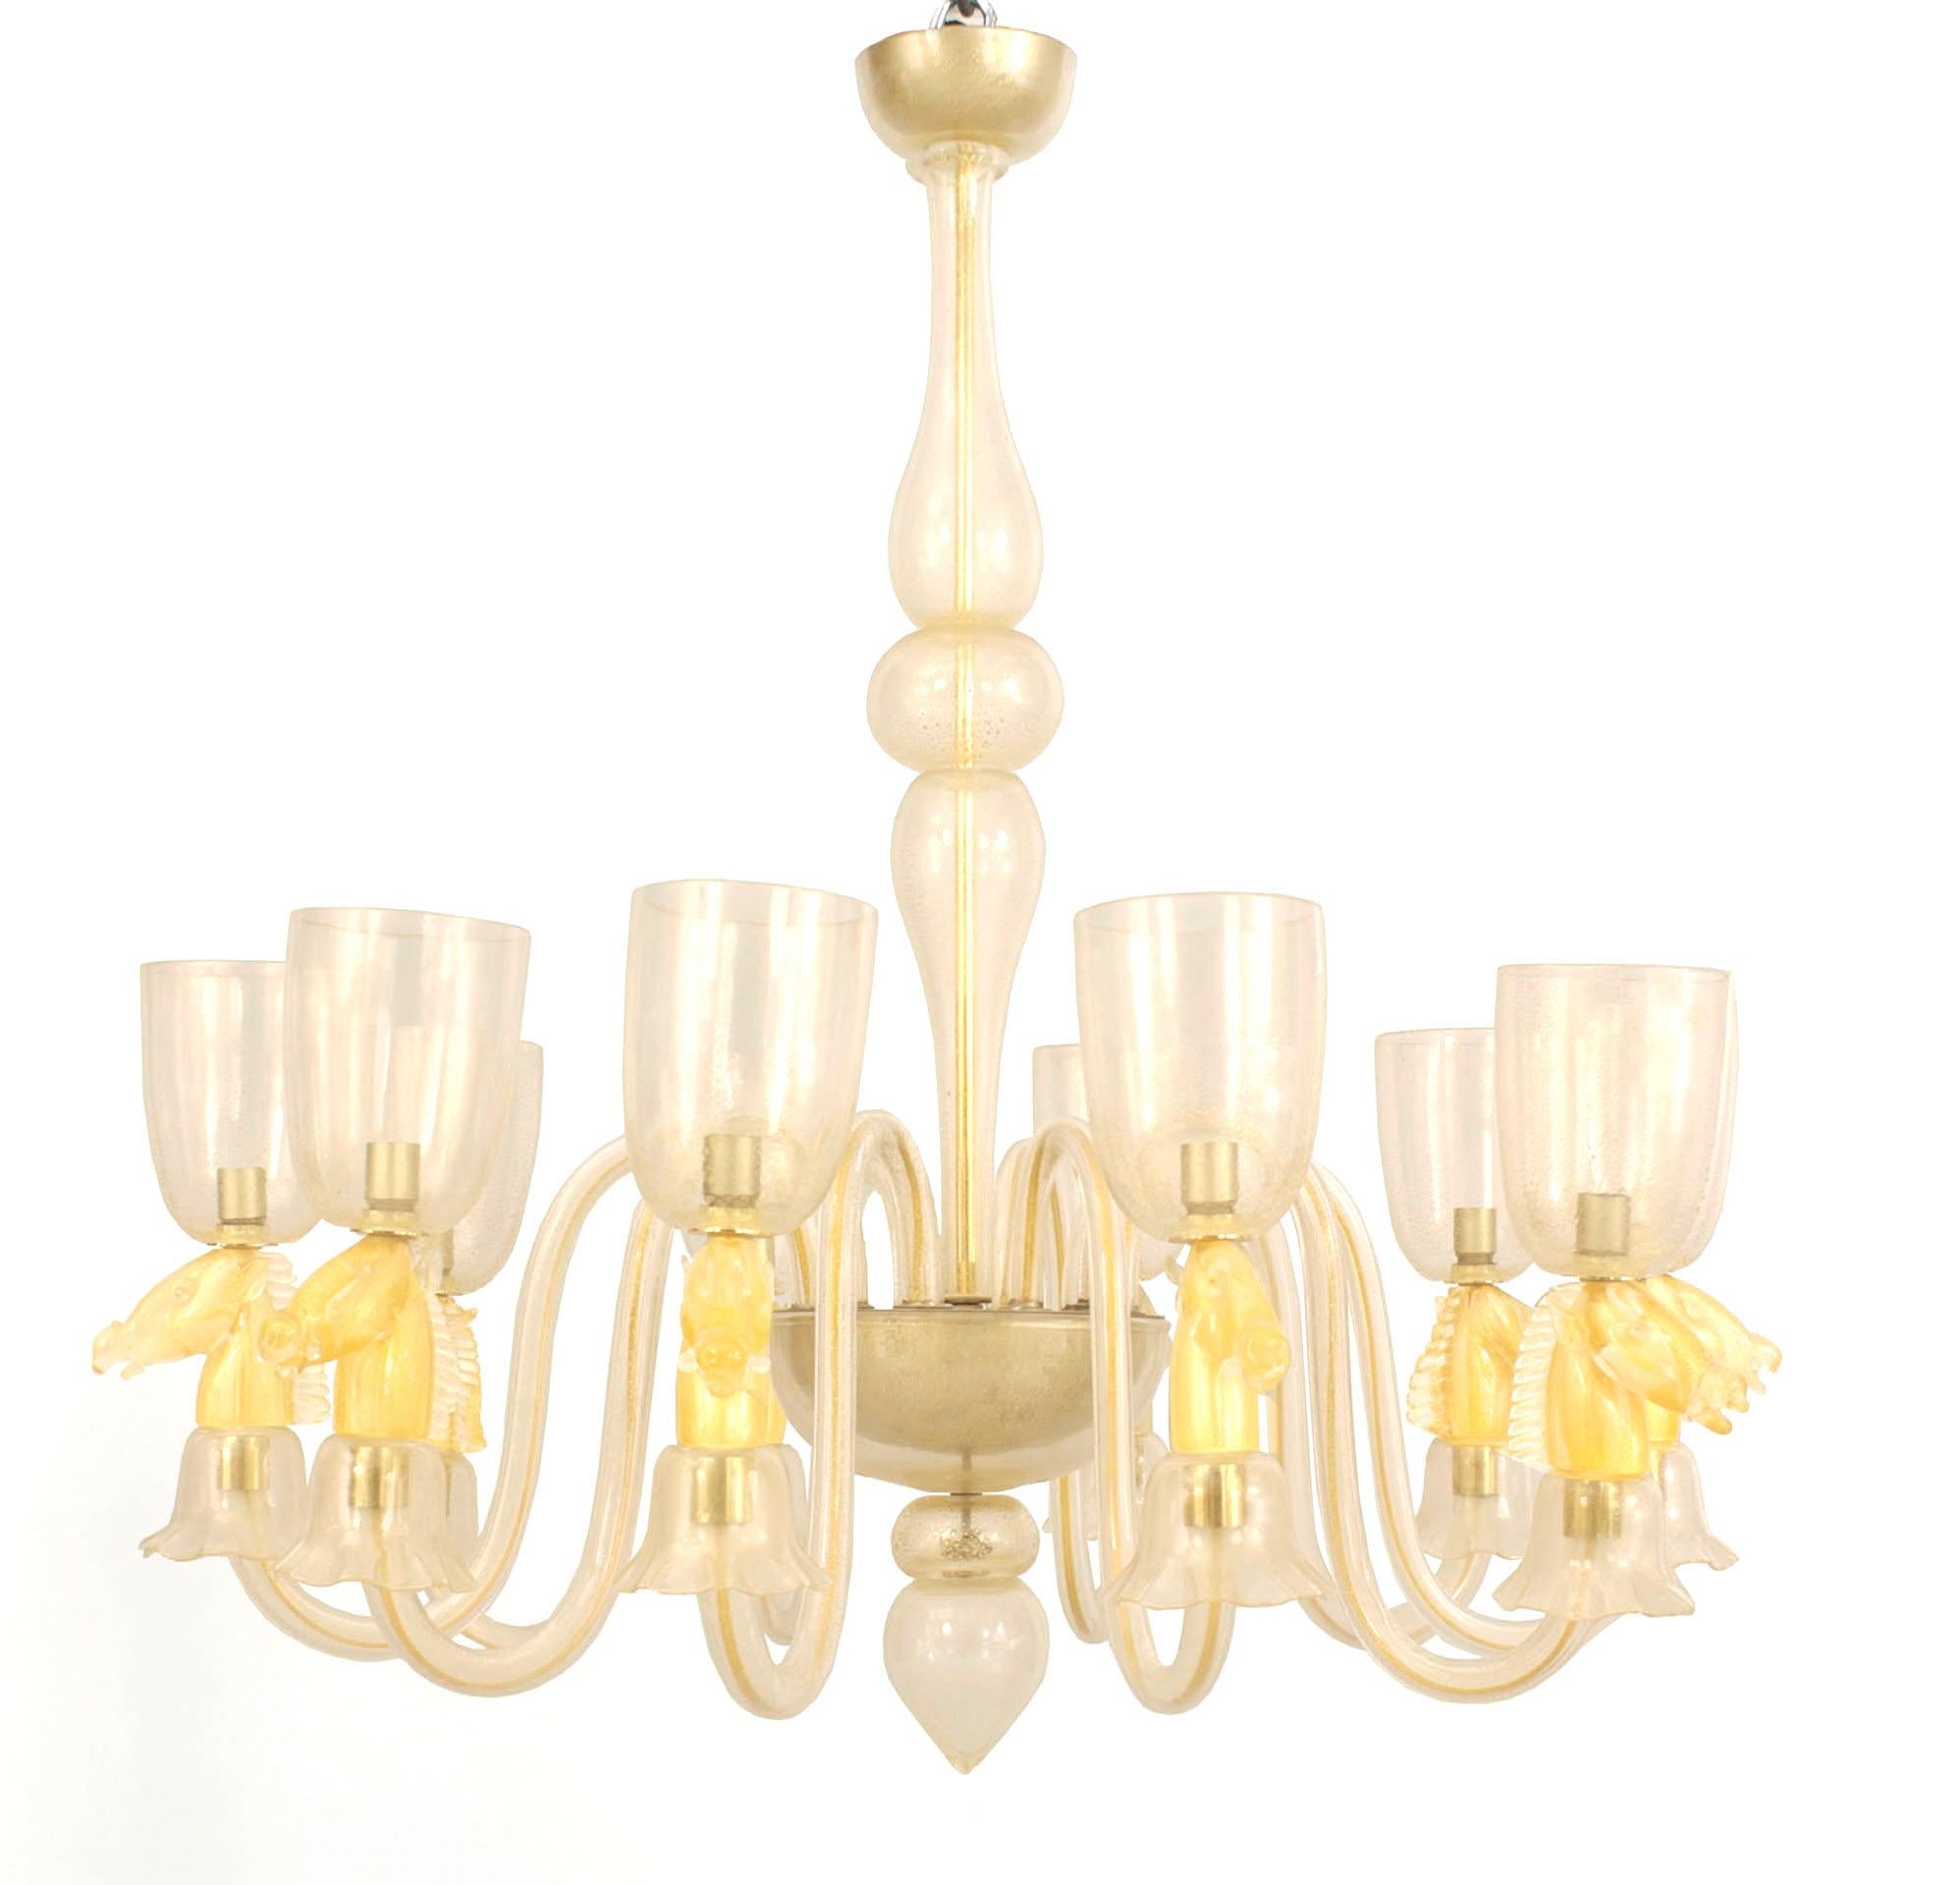 Italian Mid-Century (1940s) Murano gold dusted glass chandelier with 10 scroll shaped arms with horse heads supporting a hurricane shaped shade. (Attributed to: GIAMPOALO SEGUSO)
